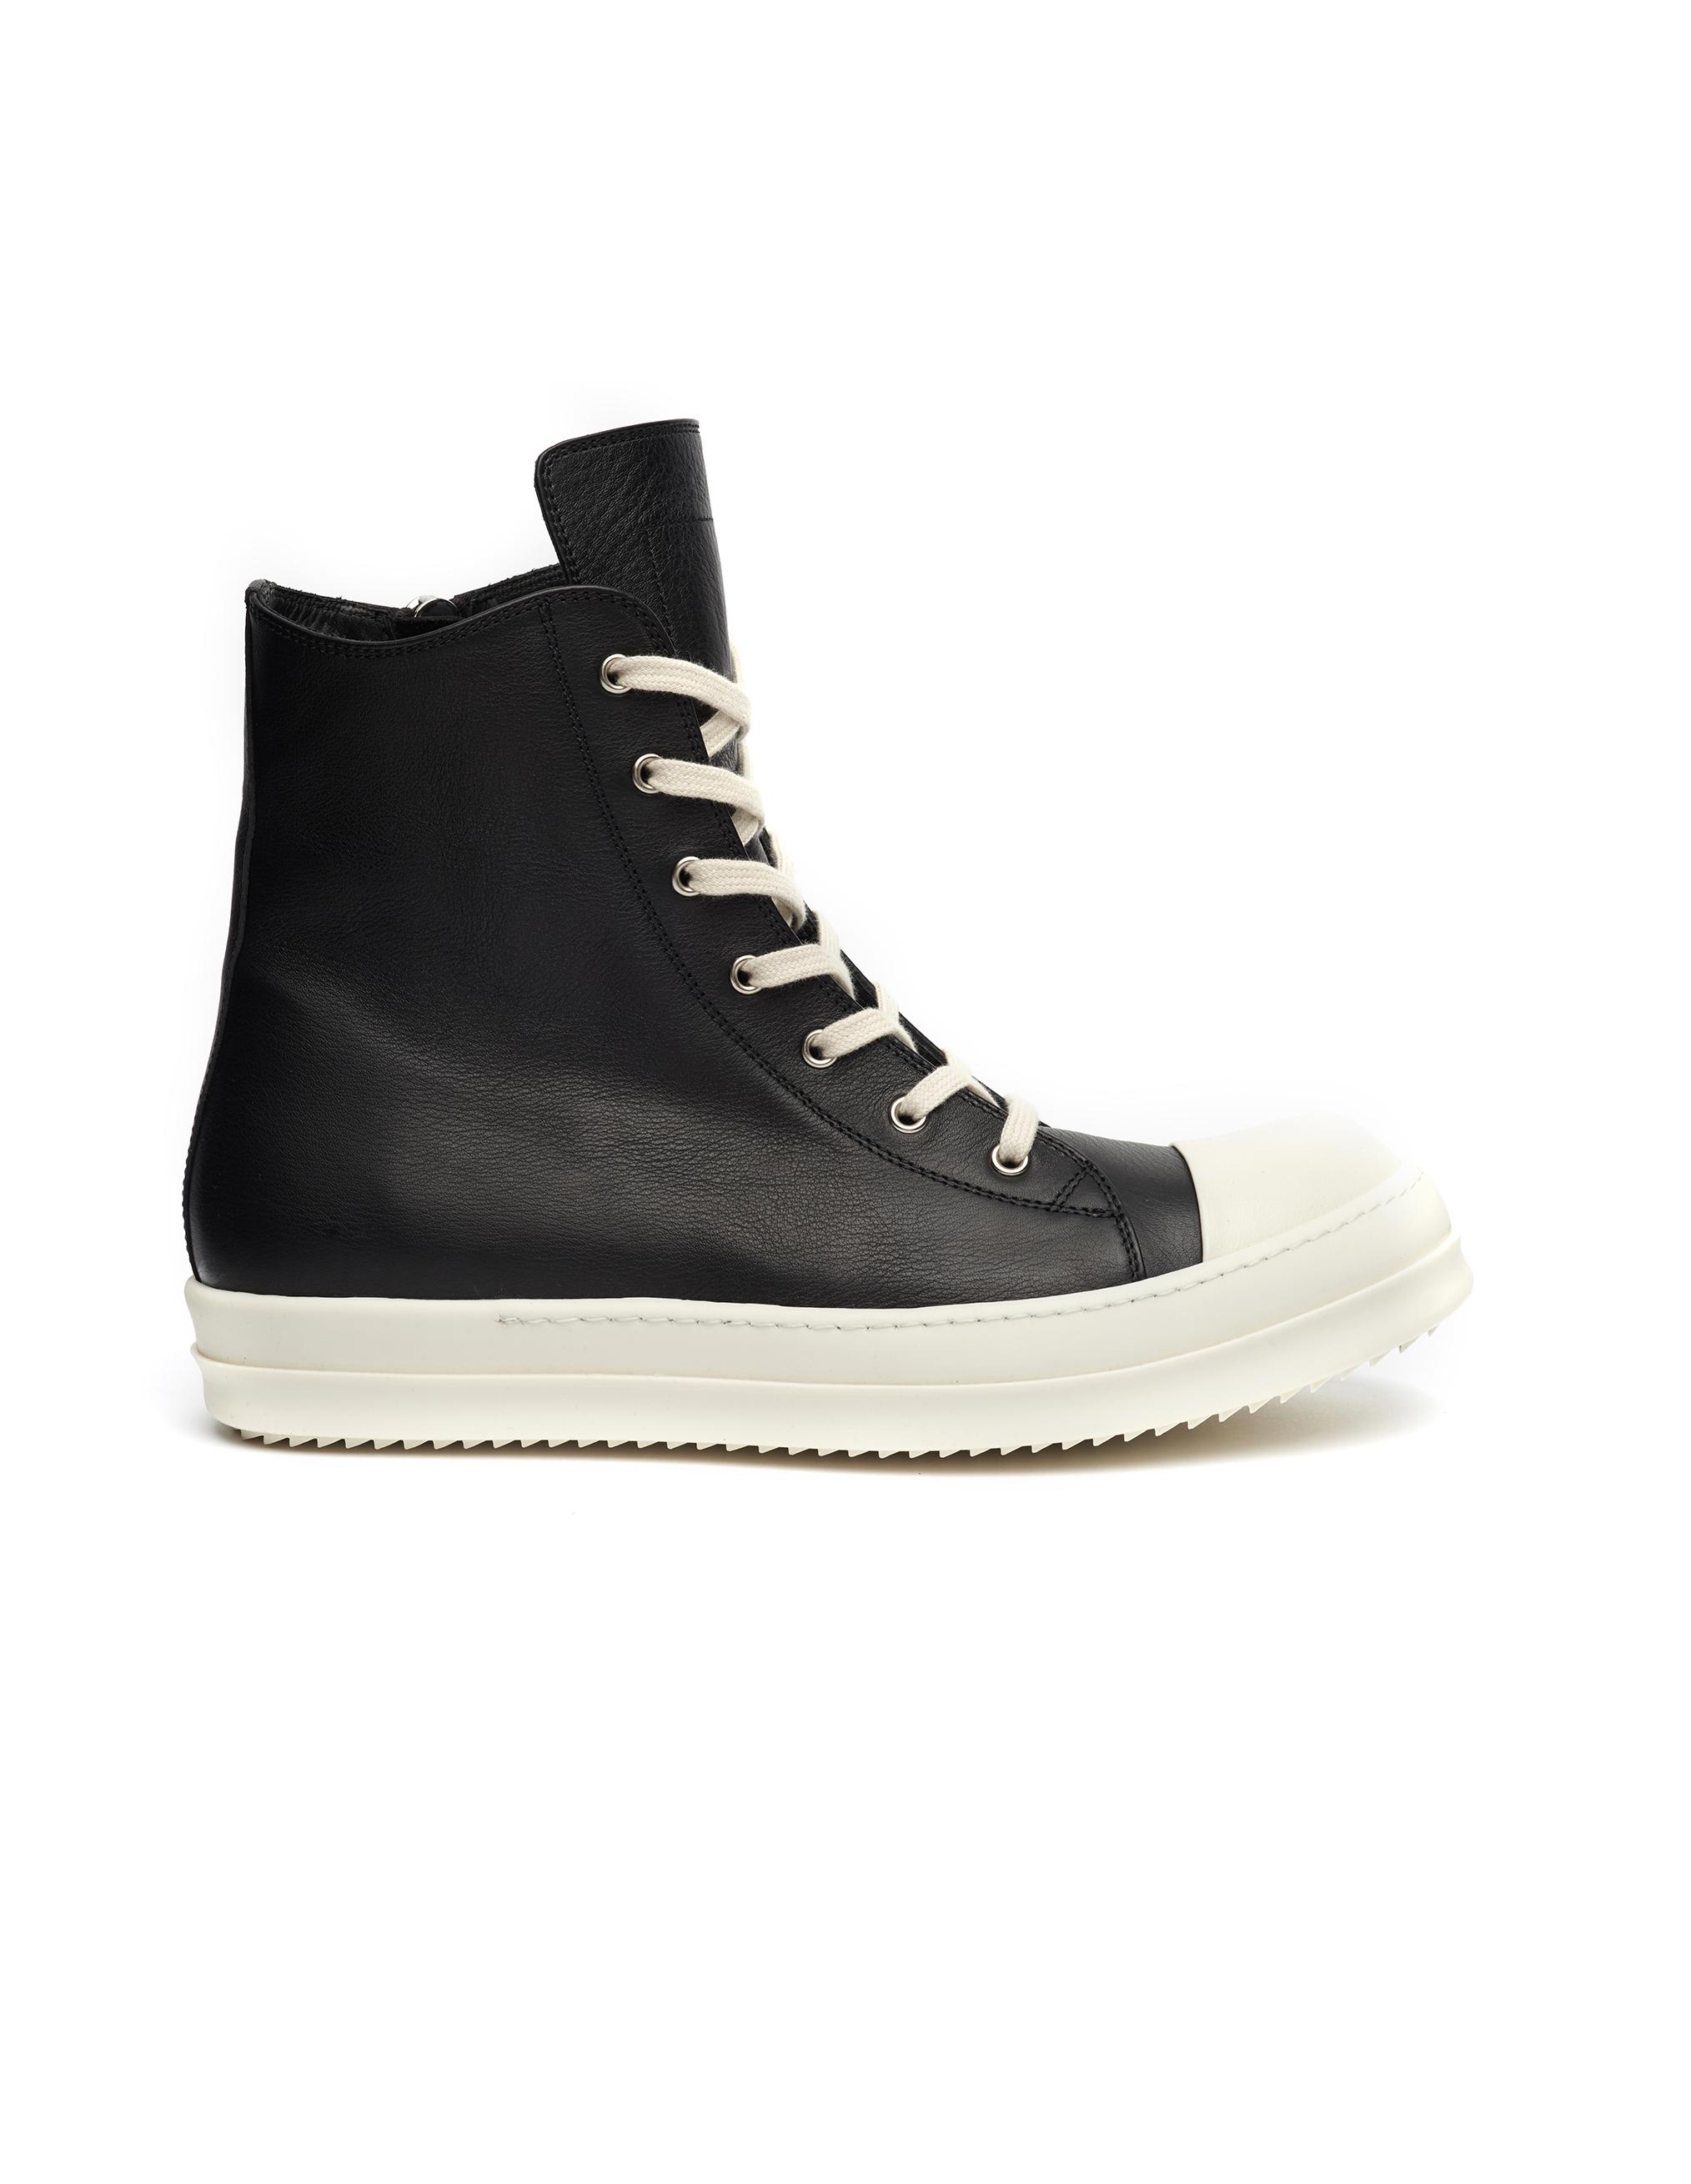 Rick Owens Leather Sneakers in Black for Men - Lyst